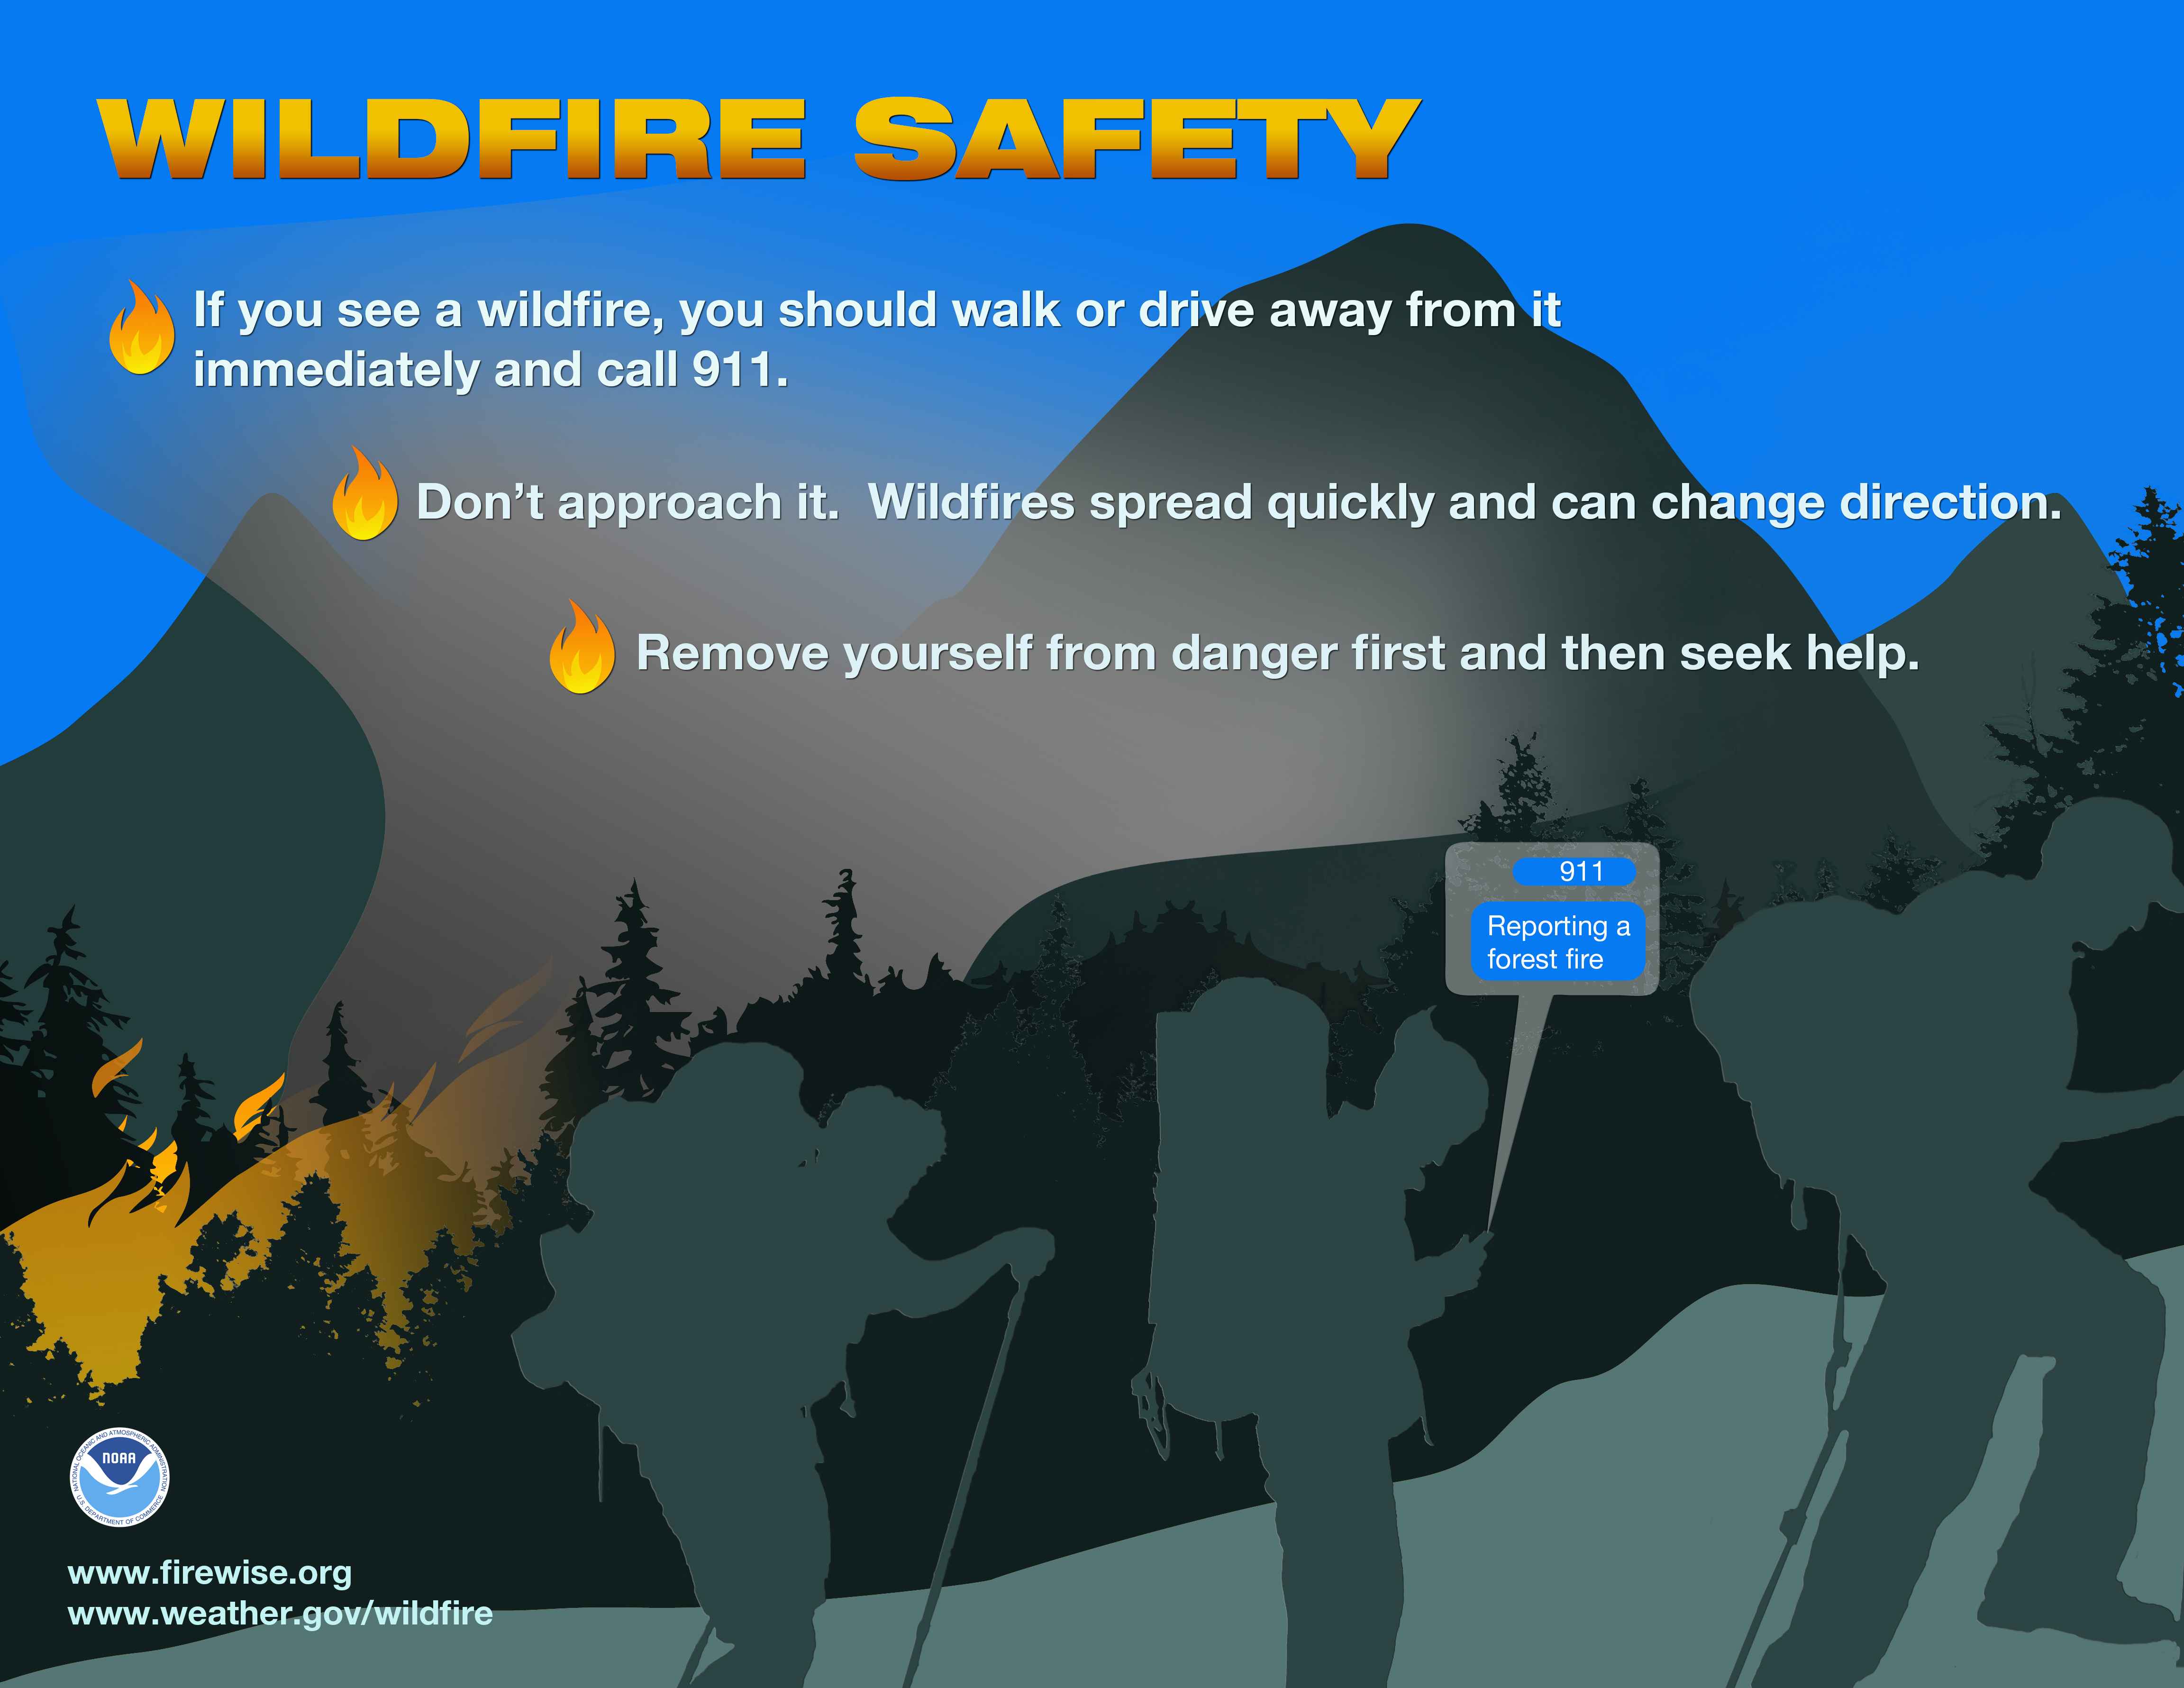 NWS Goodland Safety Graphics for Partner Use